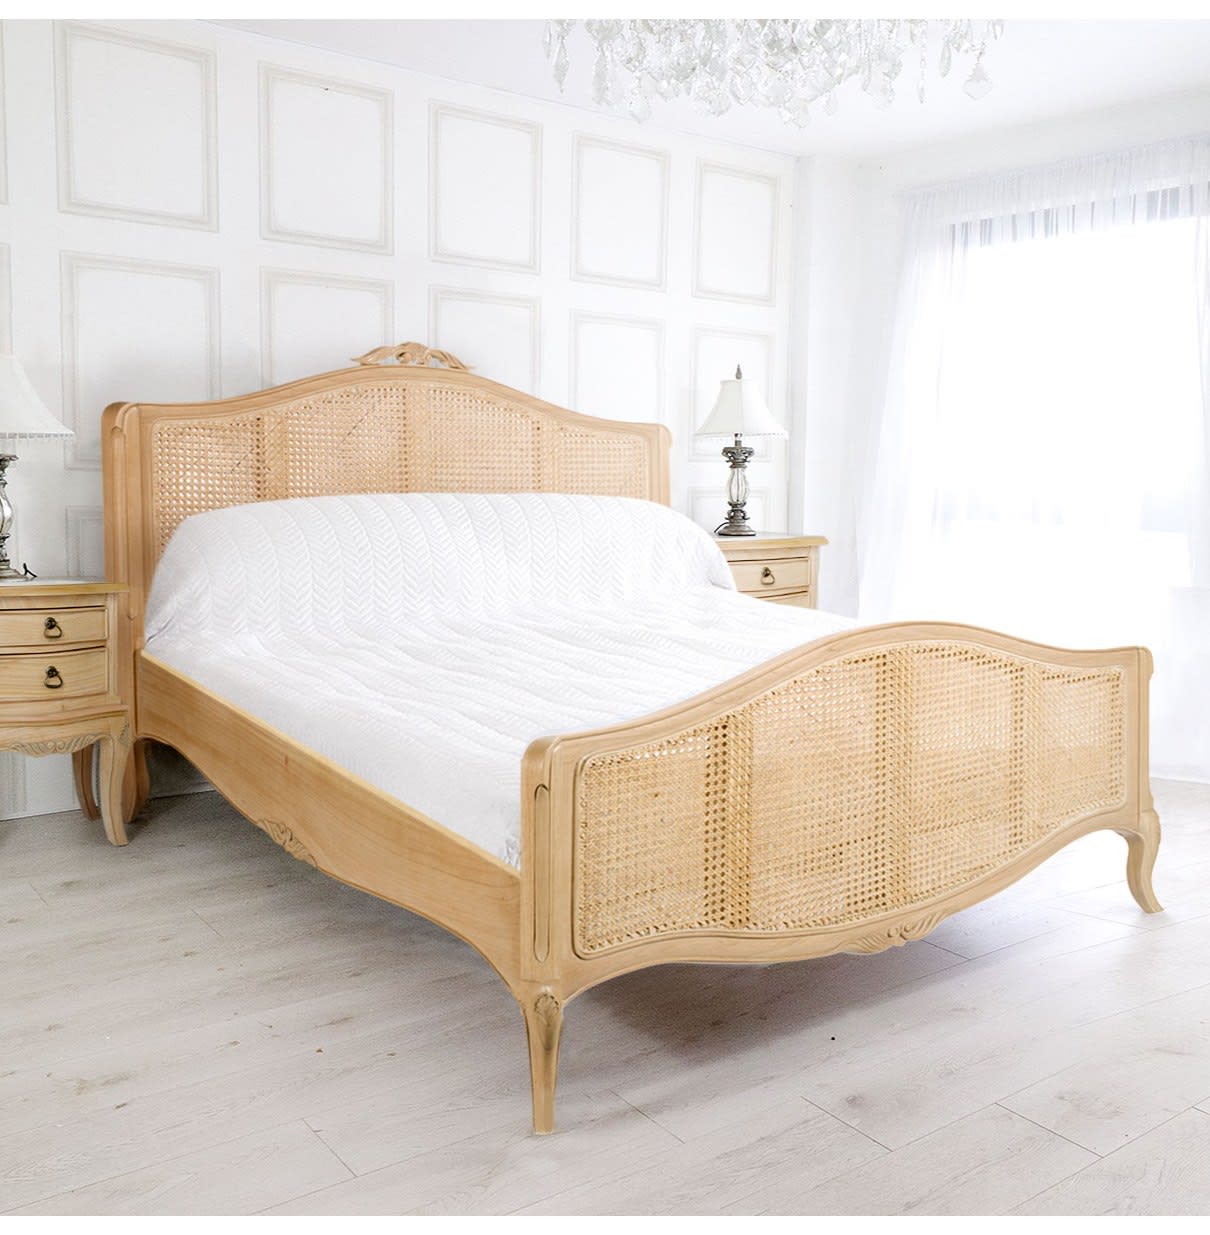 Limoges French Rattan Bed by Baker Furniture | Nicky Cornell a UK Stockist